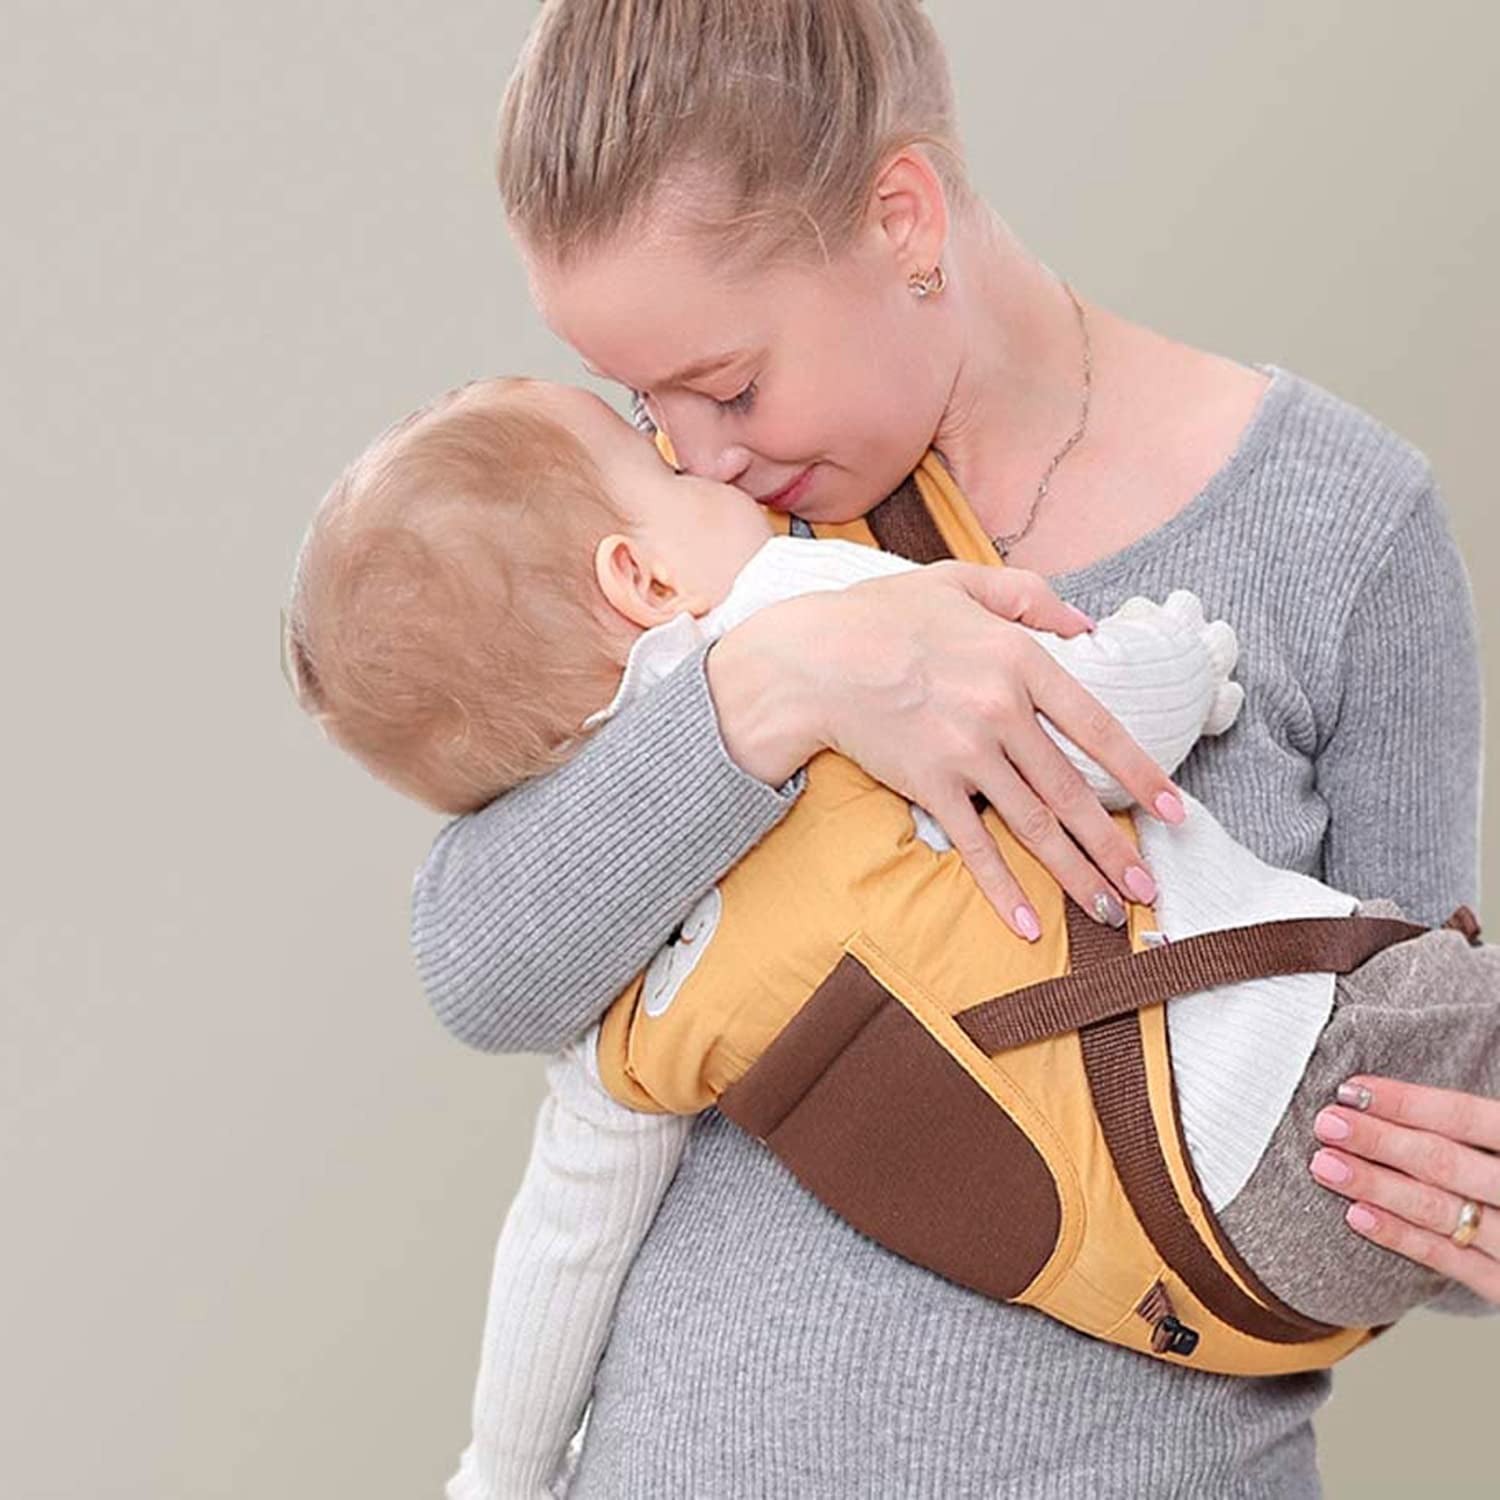 Baby Carrier With Hip Seat Ergonomic Wrap Sling Waist Stool Backpack Adjustable